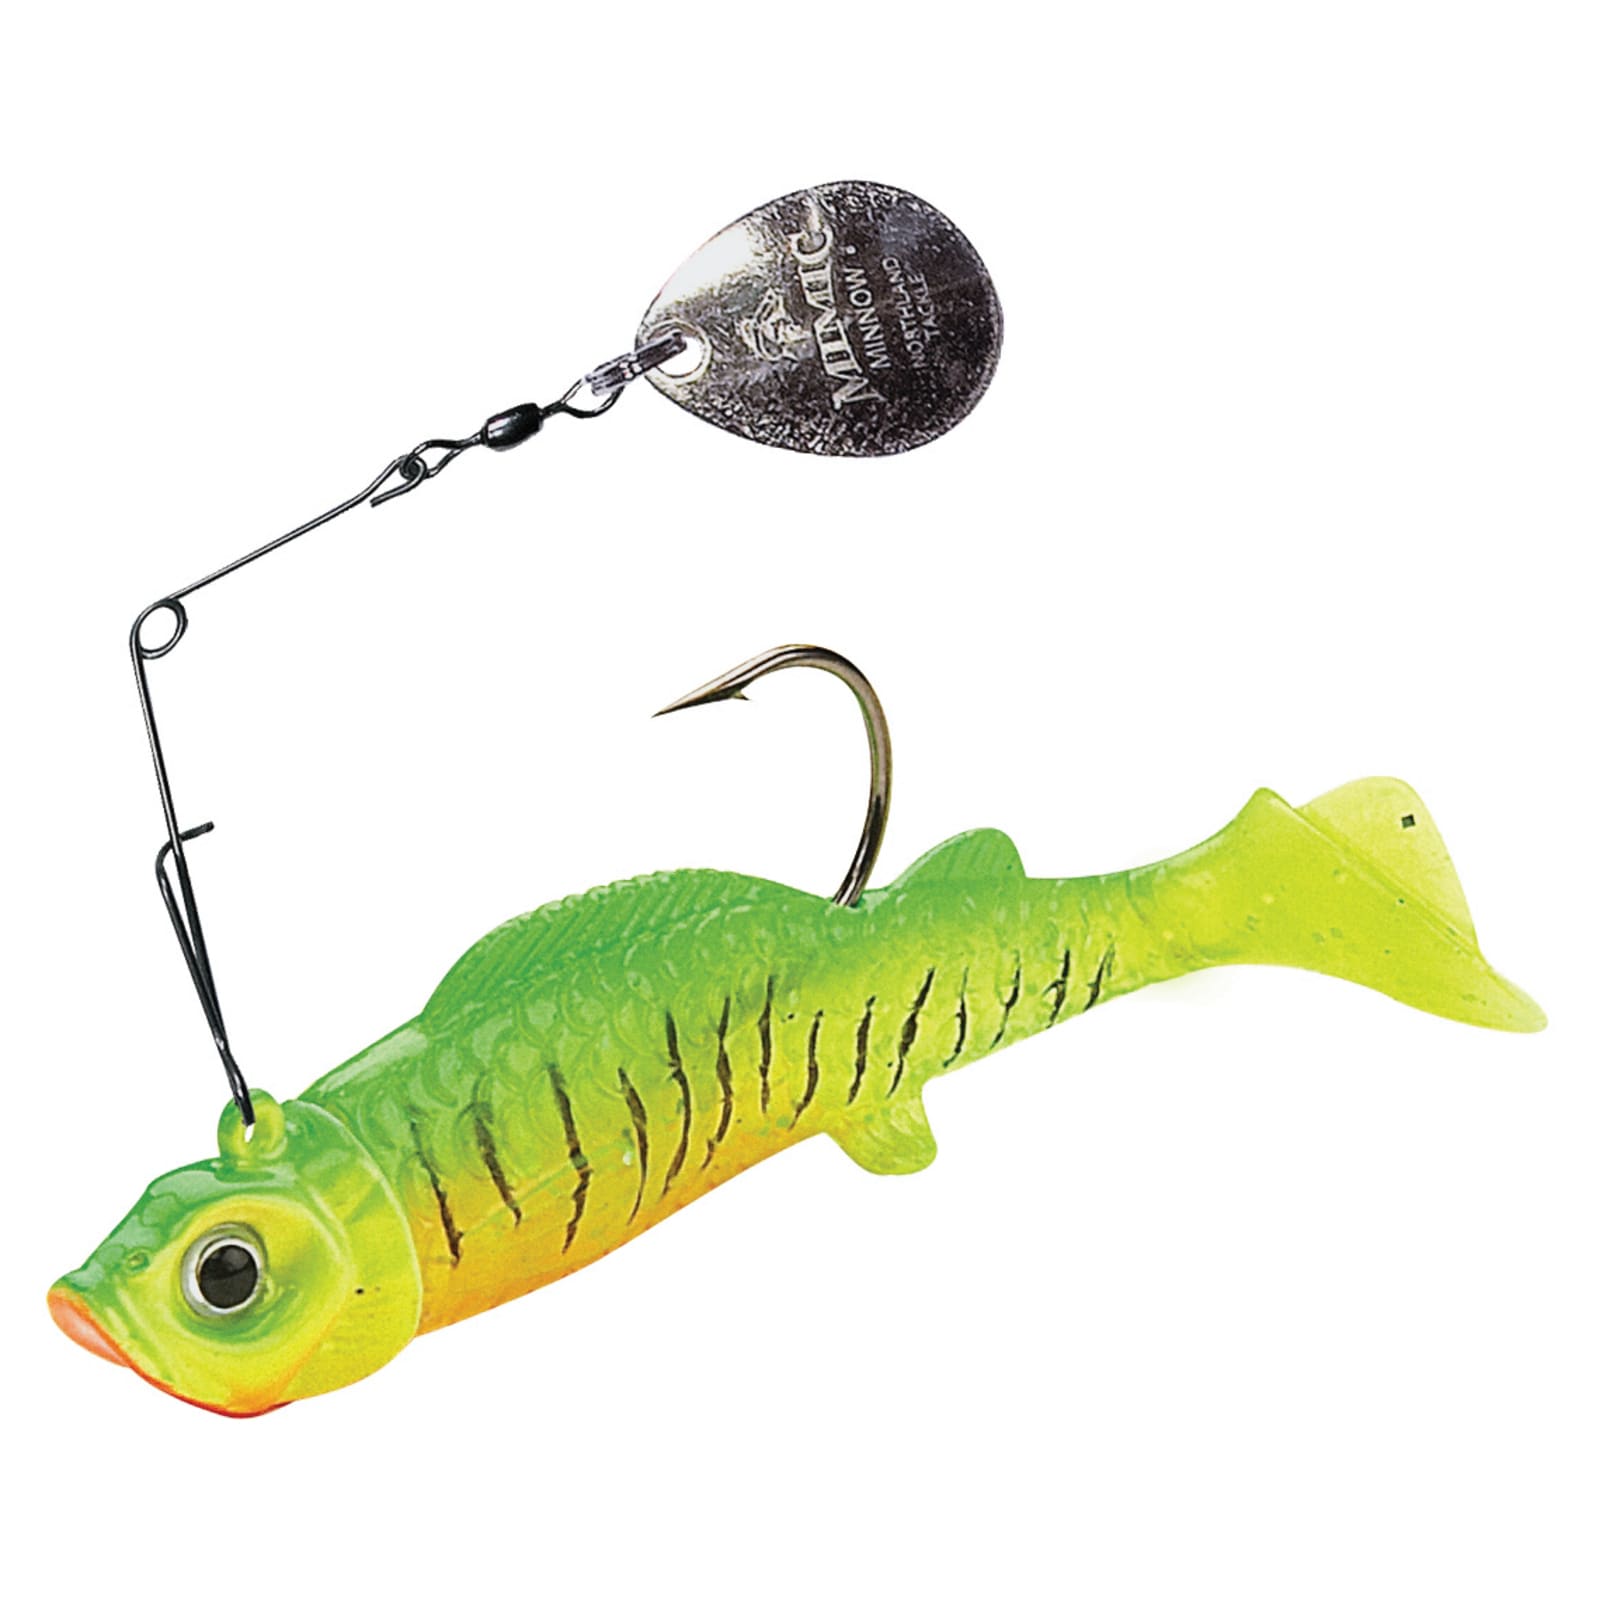 Northland Fishing Tackle Mimic Minnow Spin - Runnings